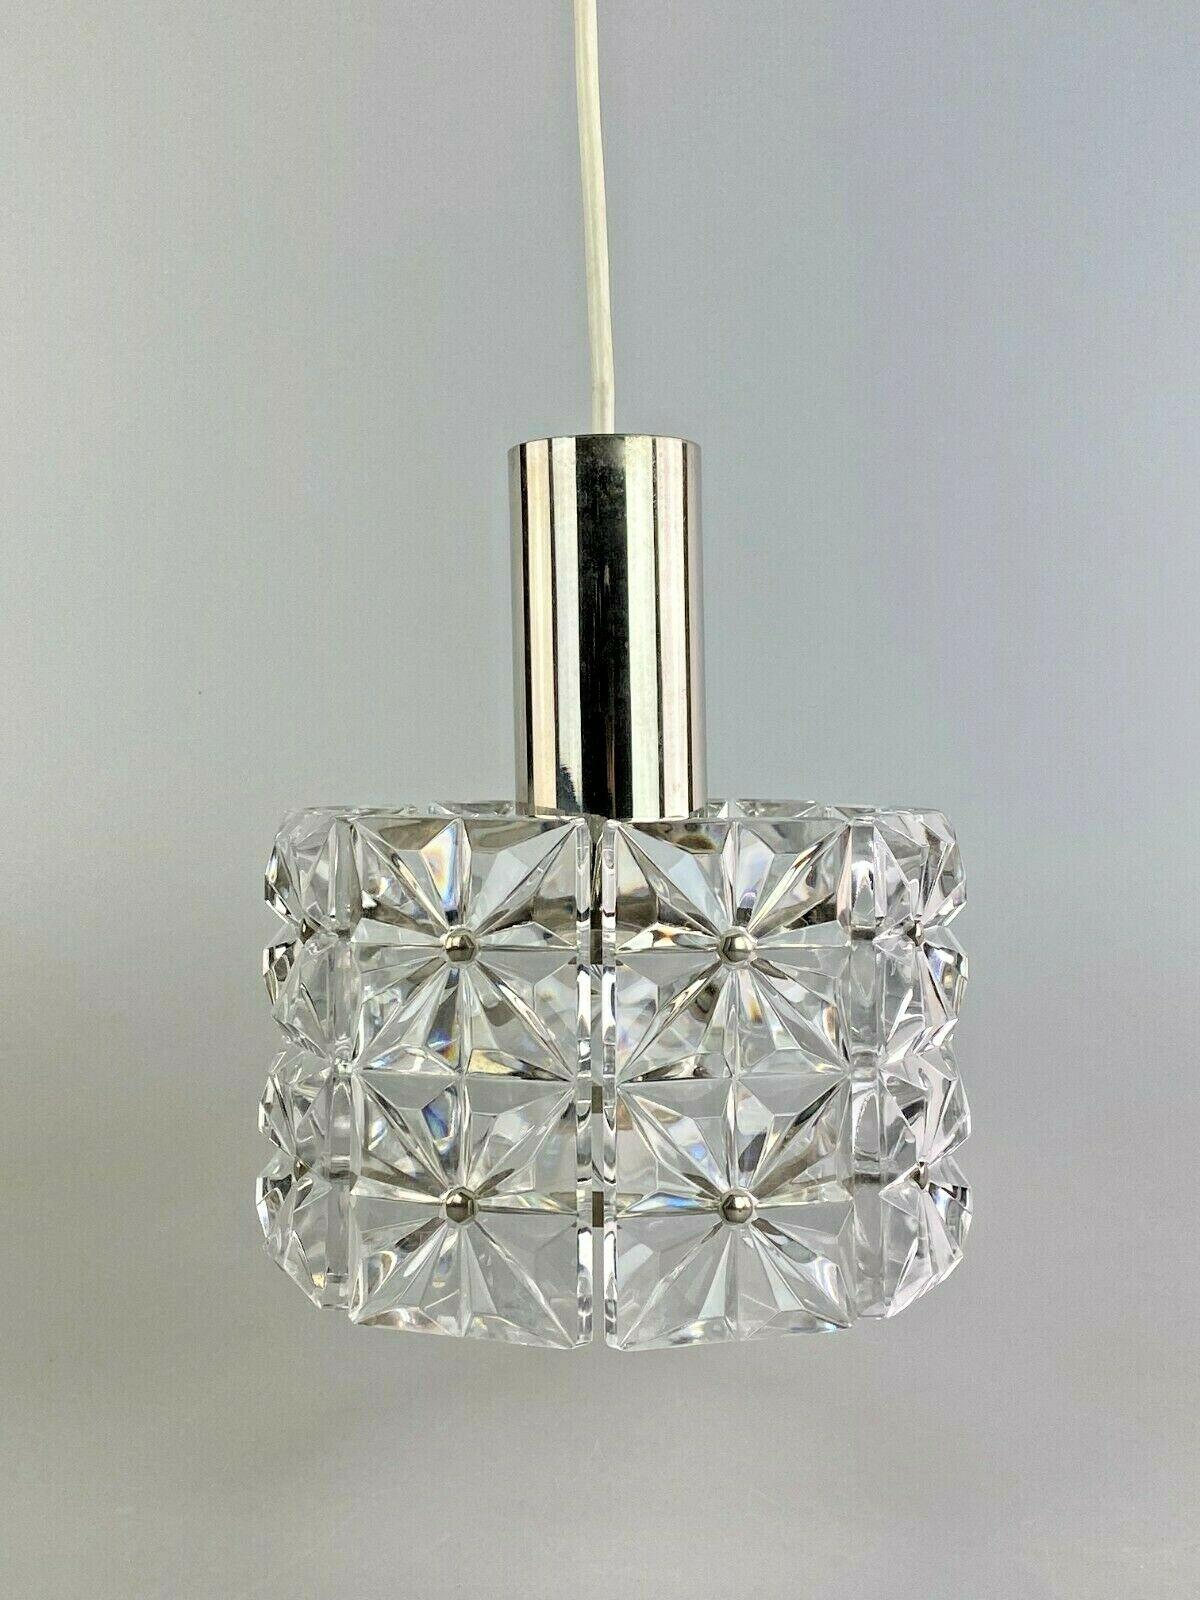 60s 70s ceiling lamp glass lamp light Kinkeldey Space Age 60s 70s

Object: ceiling lamp

Manufacturer: Kinkeldey

Condition: good

Age: around 1960-1970

Dimensions:

Diameter = 18.5cm
Height = 22cm

Other notes:

The pictures serve